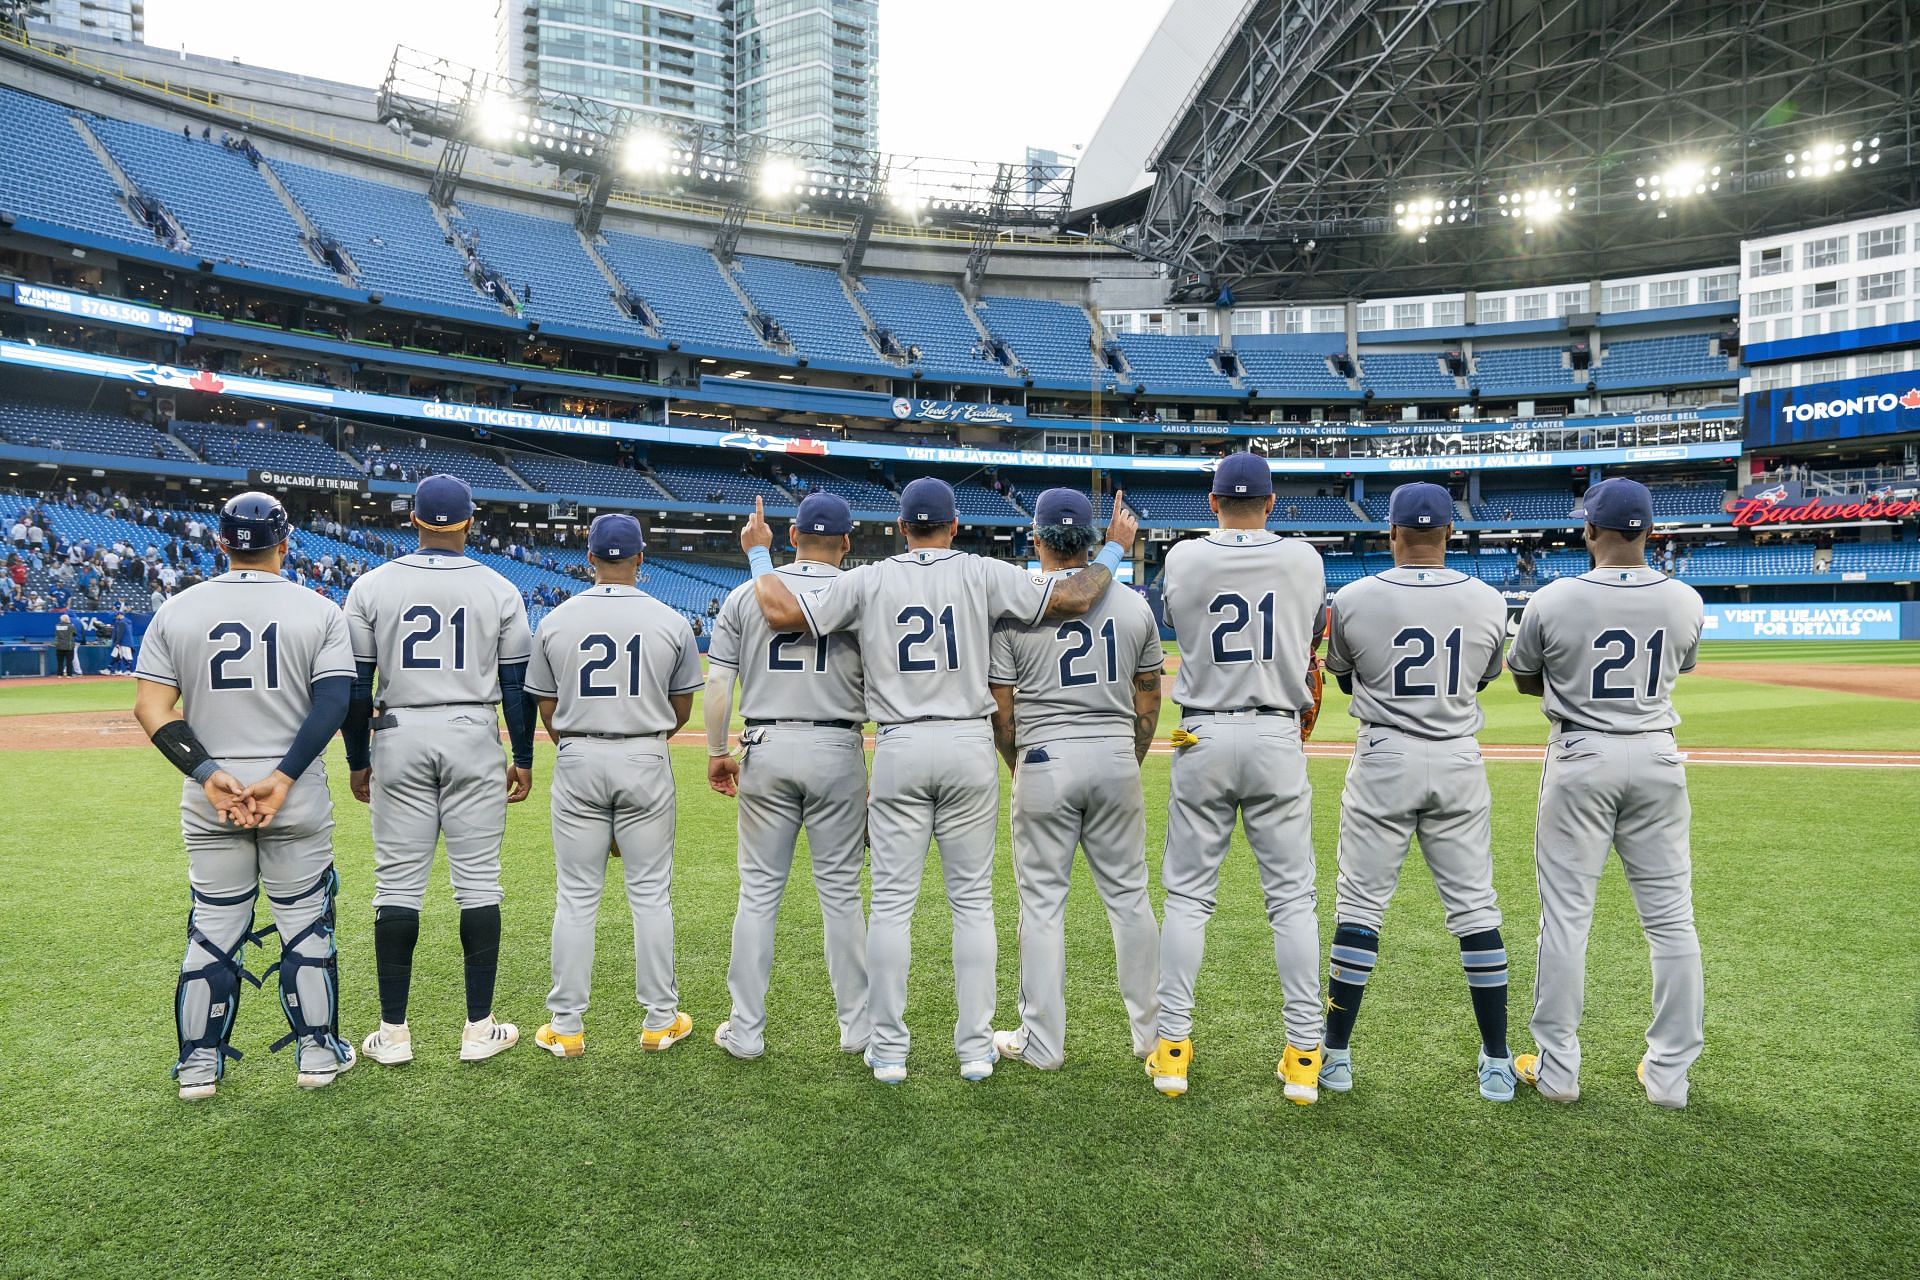 The Tampa Bay Rays pose after playing in the first all-Latino lineup in MLB history, while wearing the number 21 to honor Roberto Clemente day, following their win over the Toronto Blue Jays. (Photo by Mark Blinch/Getty Images)